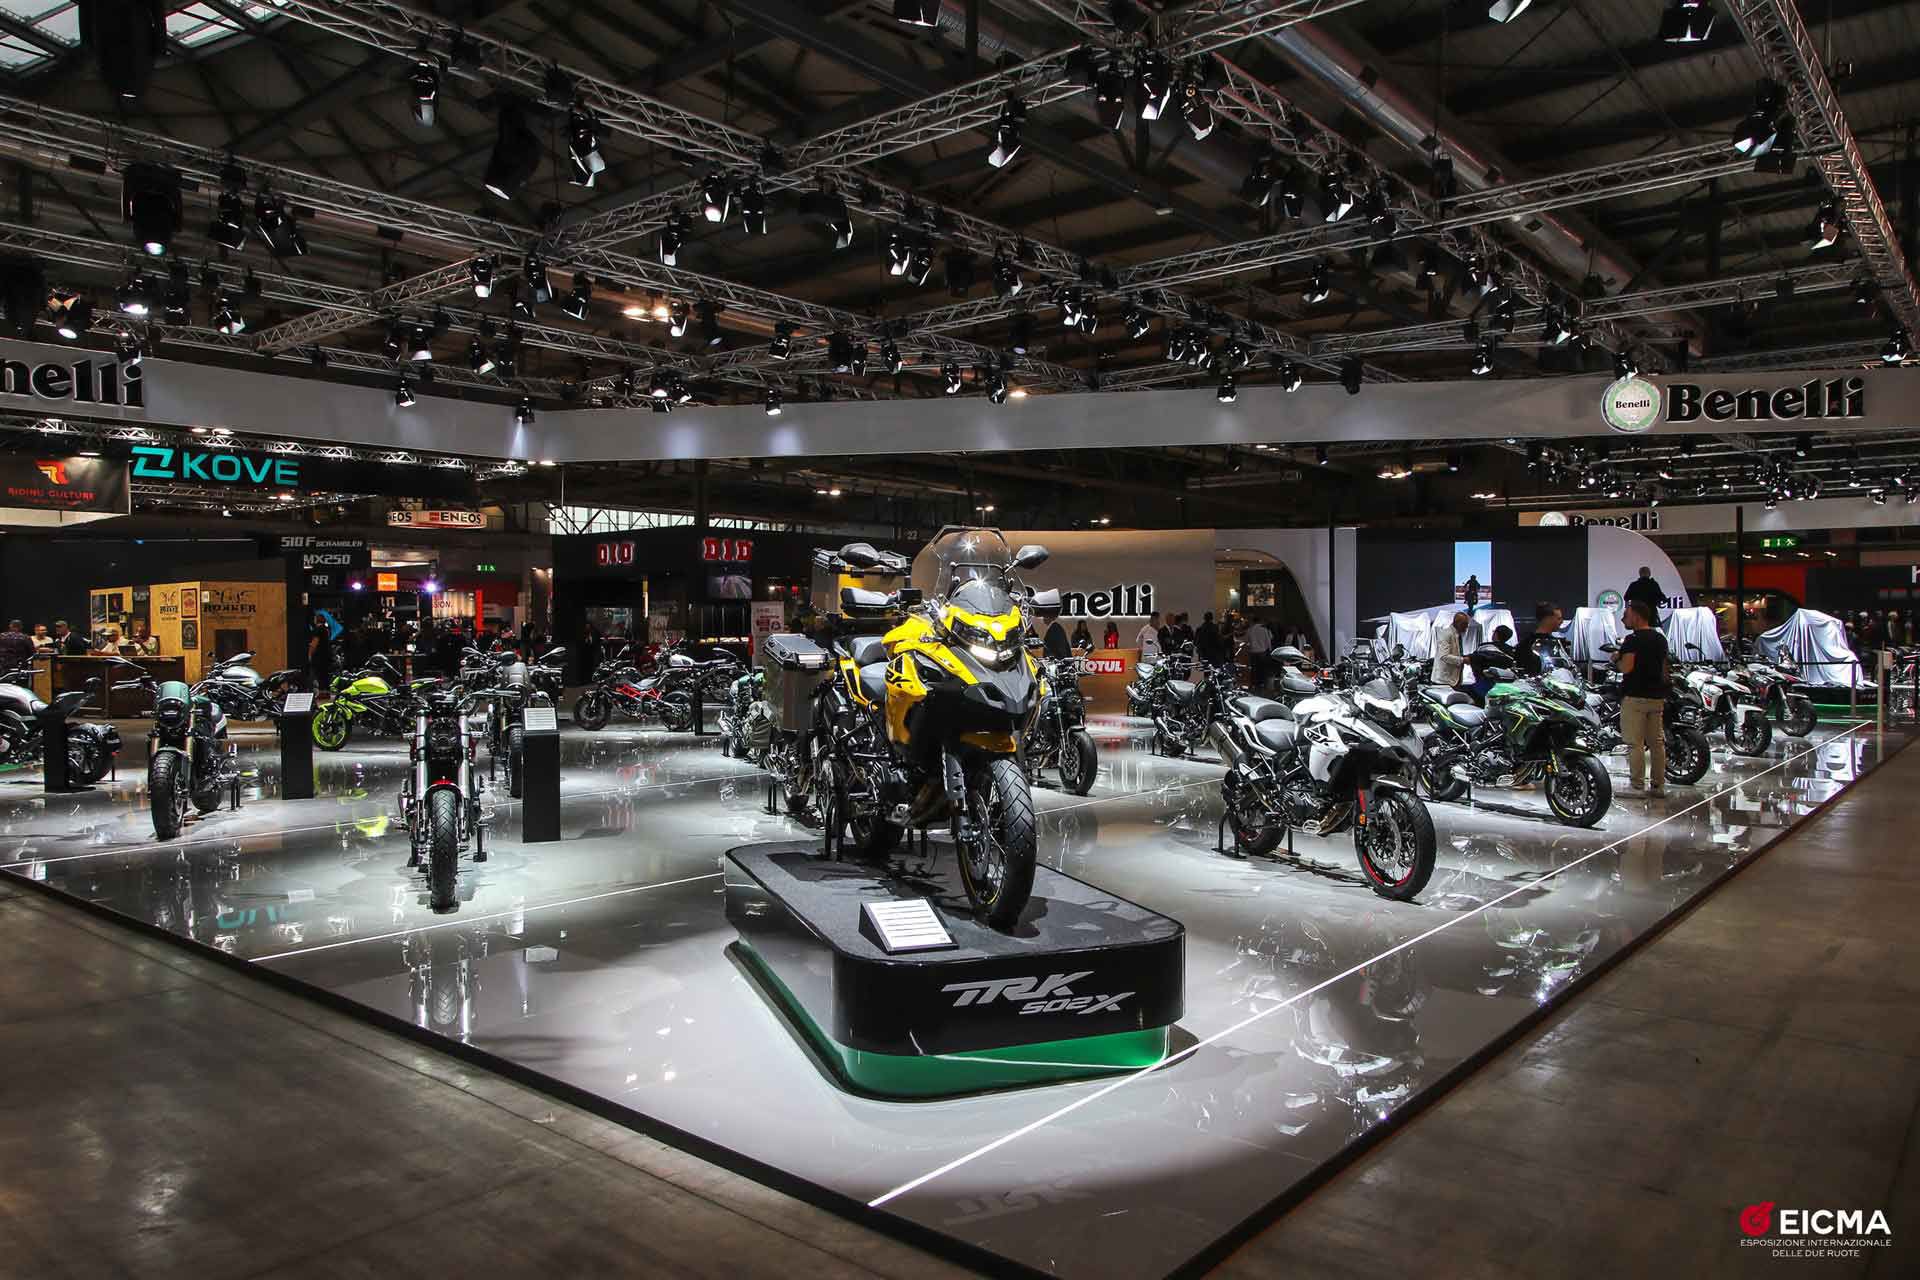 Benelli’s new Chinese owners have been on a tear of late: Three new models were announced at EICMA 2022.